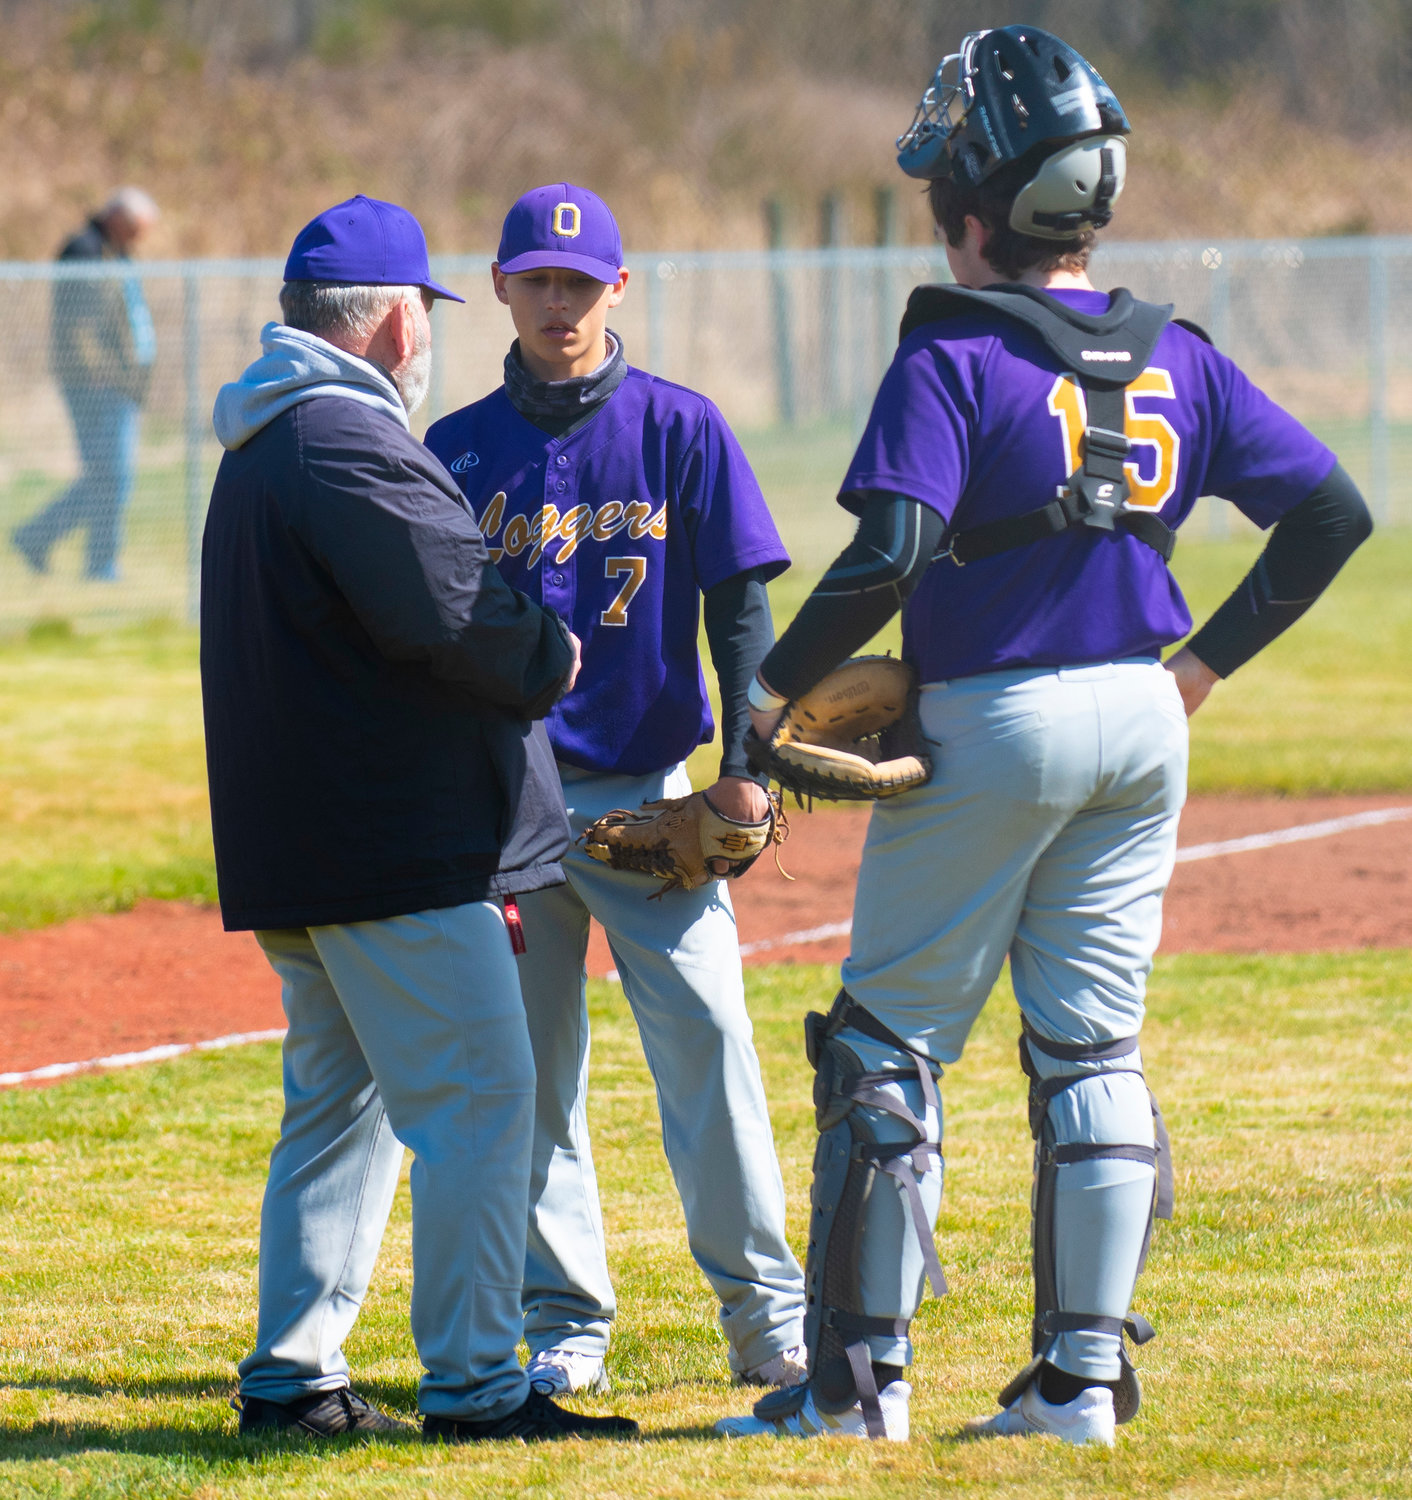 Onalaska pitcher Domanic Serl (7) has a mid-inning talk with his coach and catcher, Lane Zandell (15), on Friday at home.